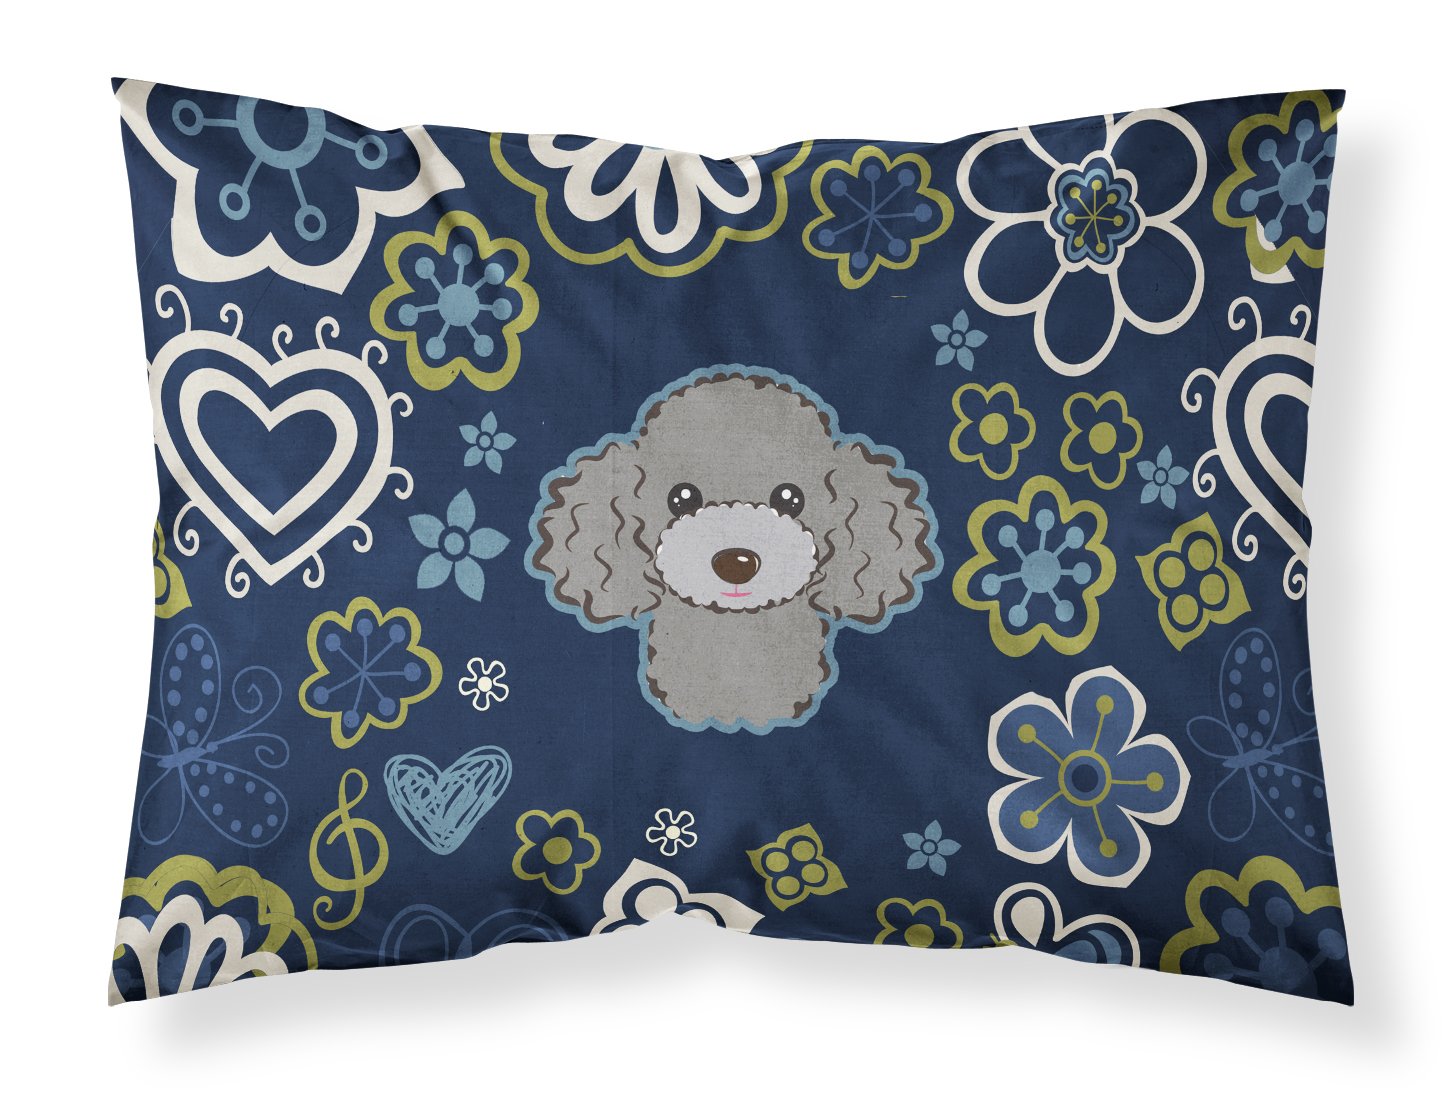 Blue Flowers Silver Gray Poodle Fabric Standard Pillowcase BB5110PILLOWCASE by Caroline's Treasures